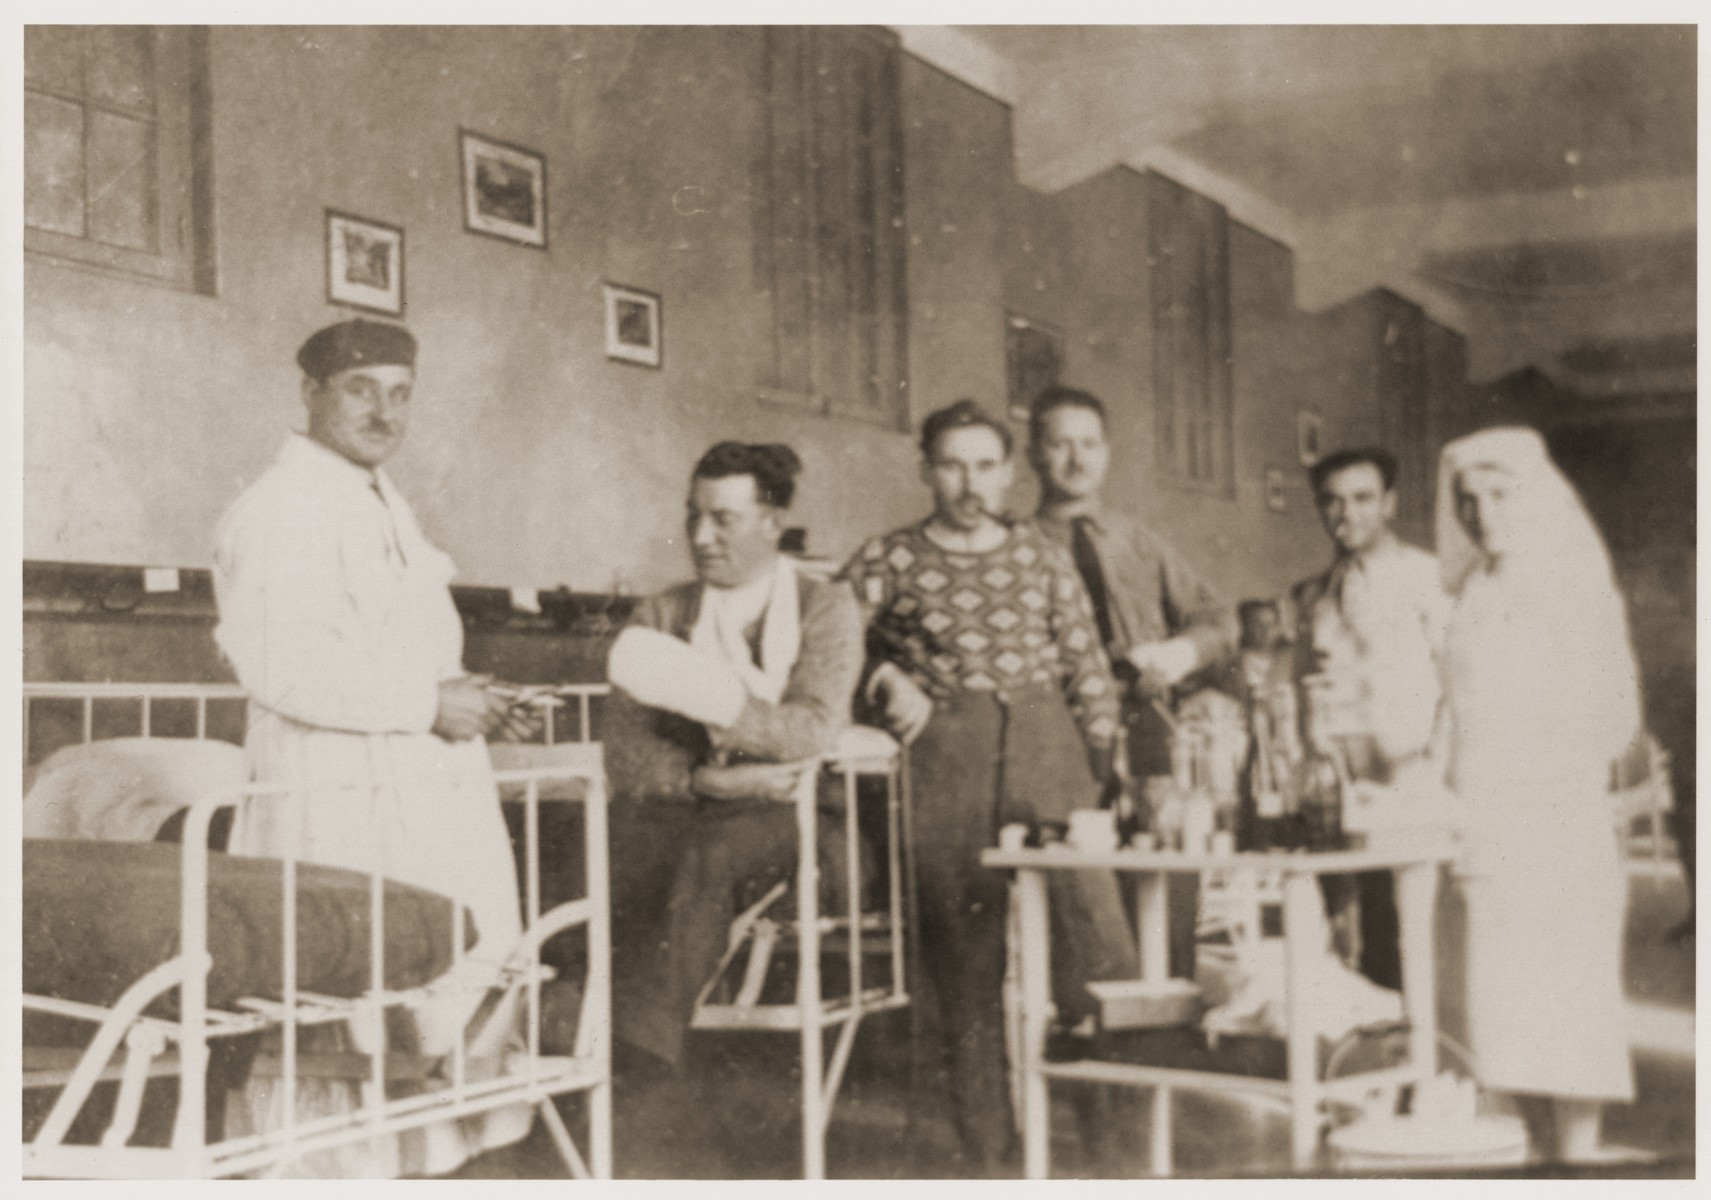 View of patients inside the Noe Hospital. 

Isabelle Peloux, the aunt of Marie Genevieve Parmentier, is at the right.  The original inscription on the back reads: "A souvenir of your good care."

Marie Genevieve Parmentier was a ten year-old French girl living in Paris at the time of the German occupation in 1940. Her widowed mother sent her to safety with an old relative in Ariège in the South of France. She sooned joined her aunt, Isabelle Peloux, a military nurse, at the camp of Recebedou. While there she attended primary school at nearby Portet-sur-Garonne, before returning to her family in the summer of 1941.